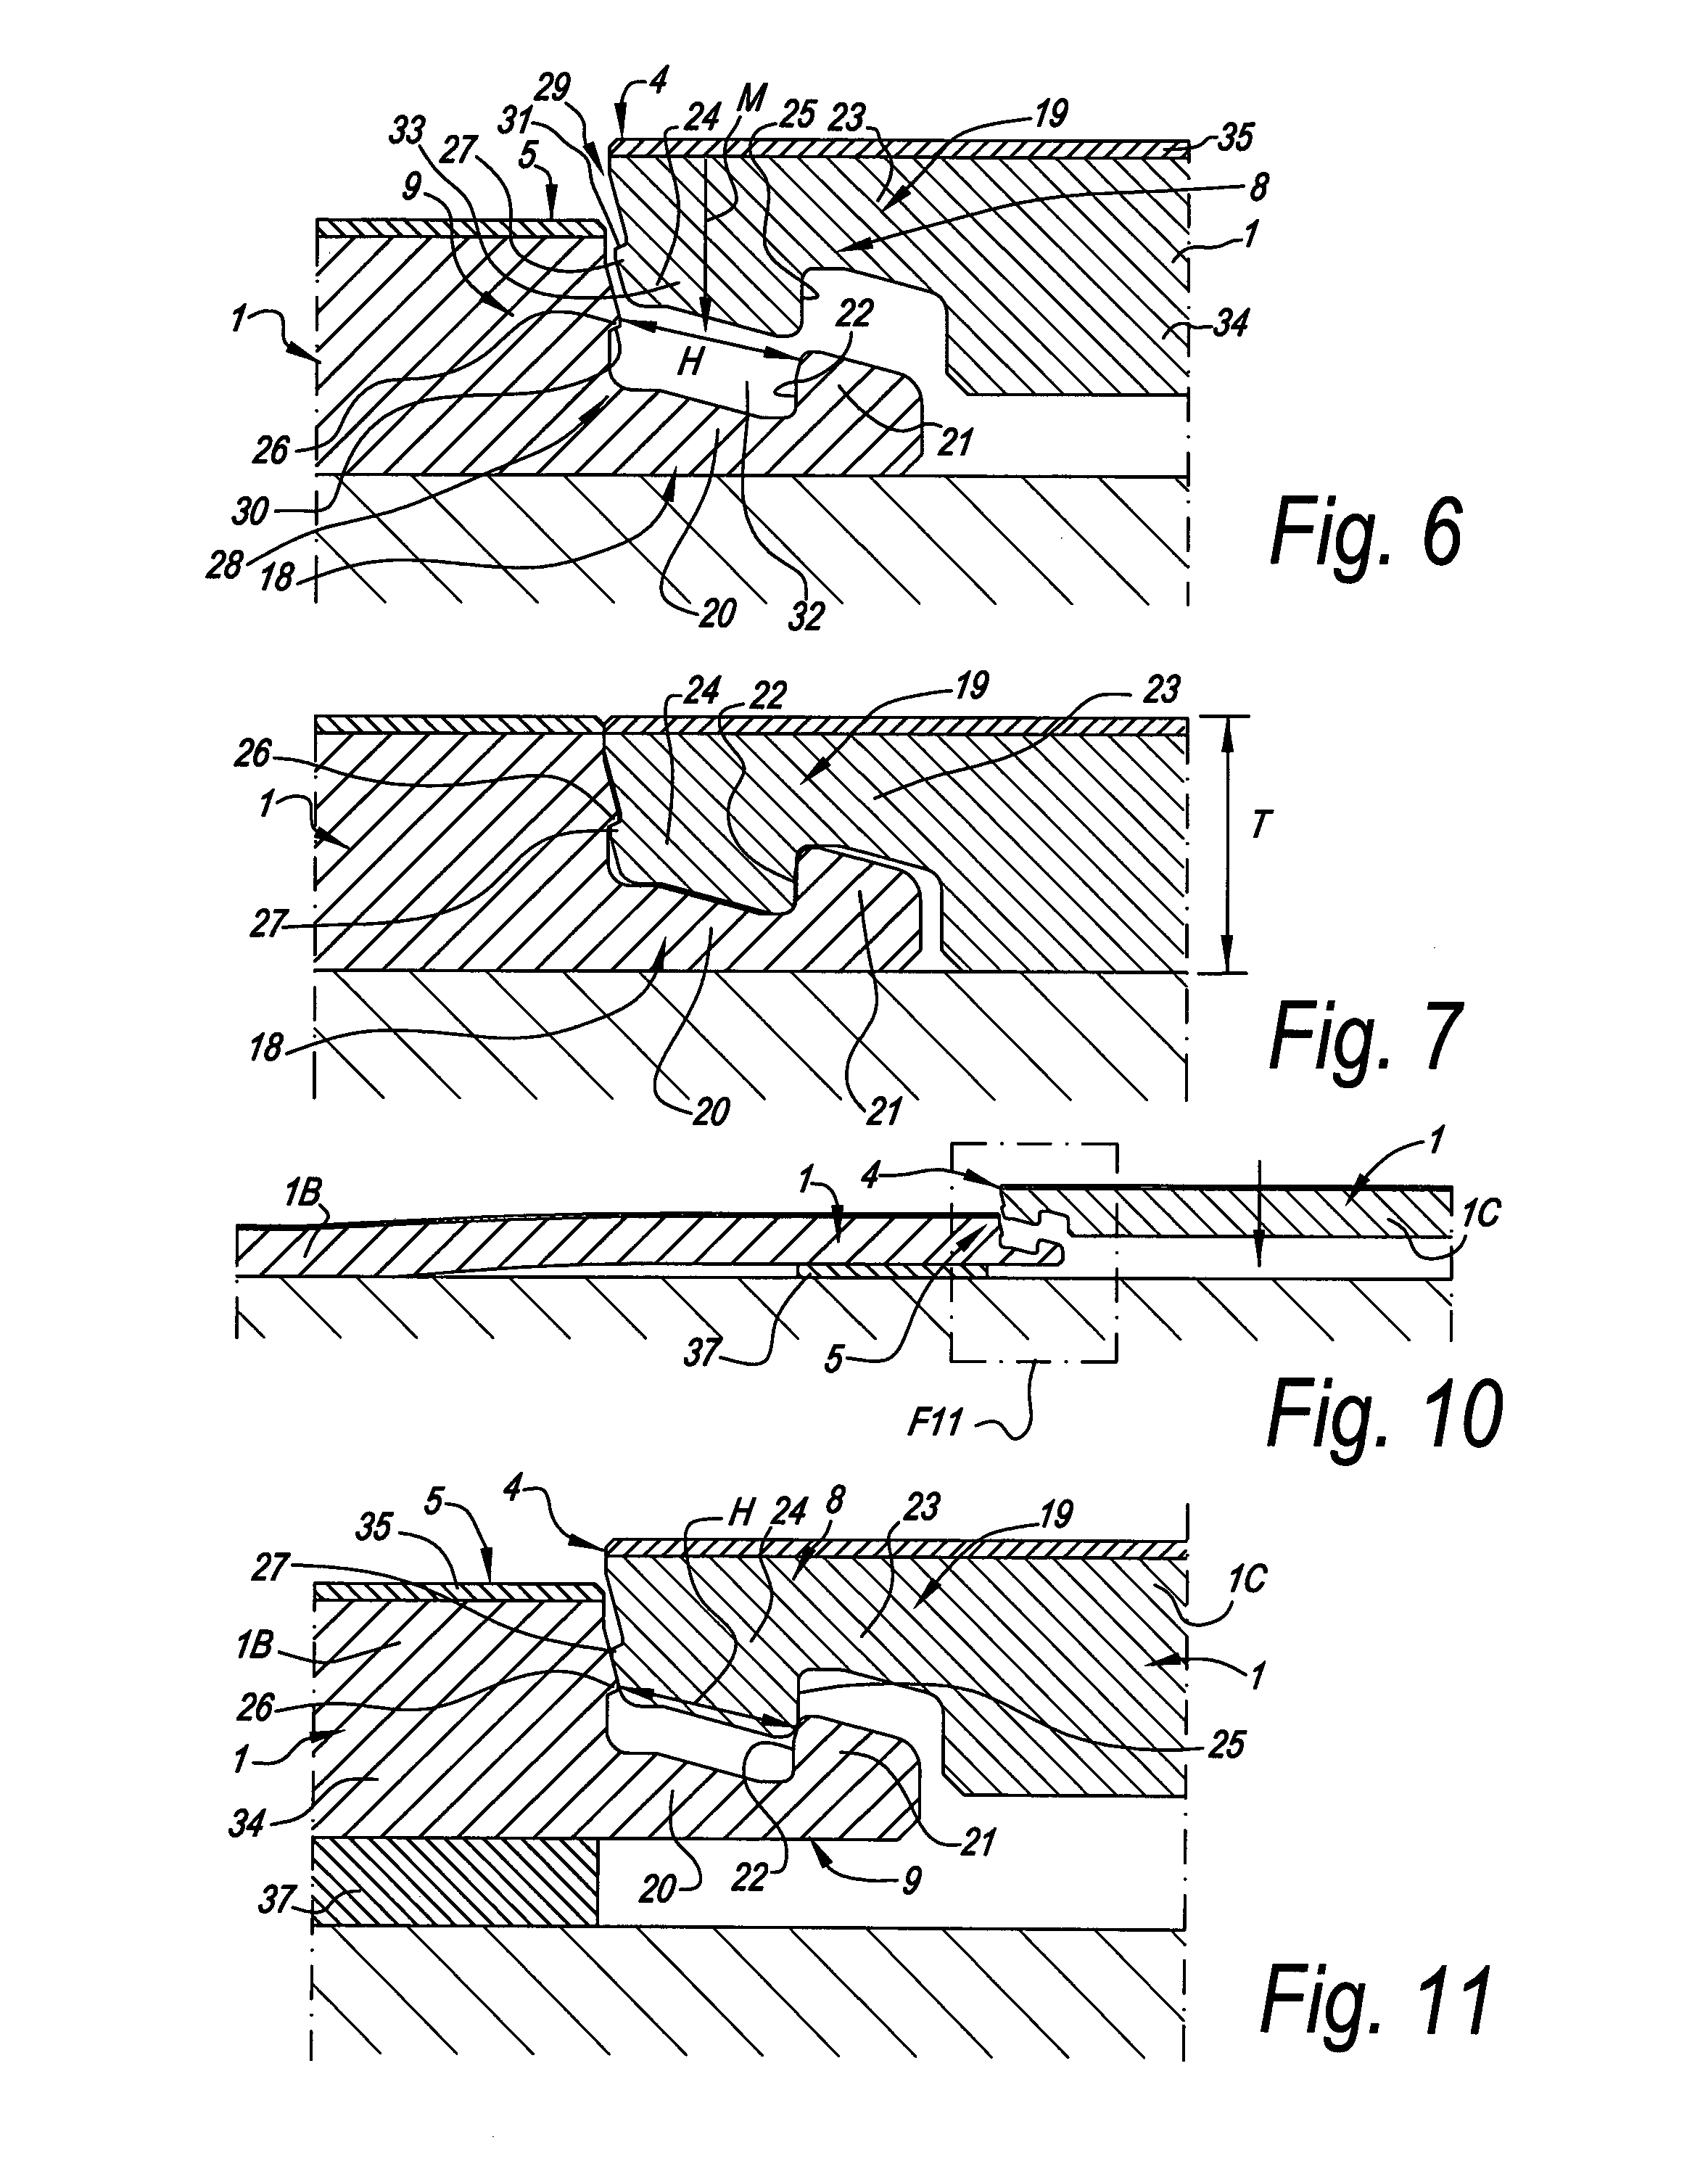 Panel, covering and method for installing such panels